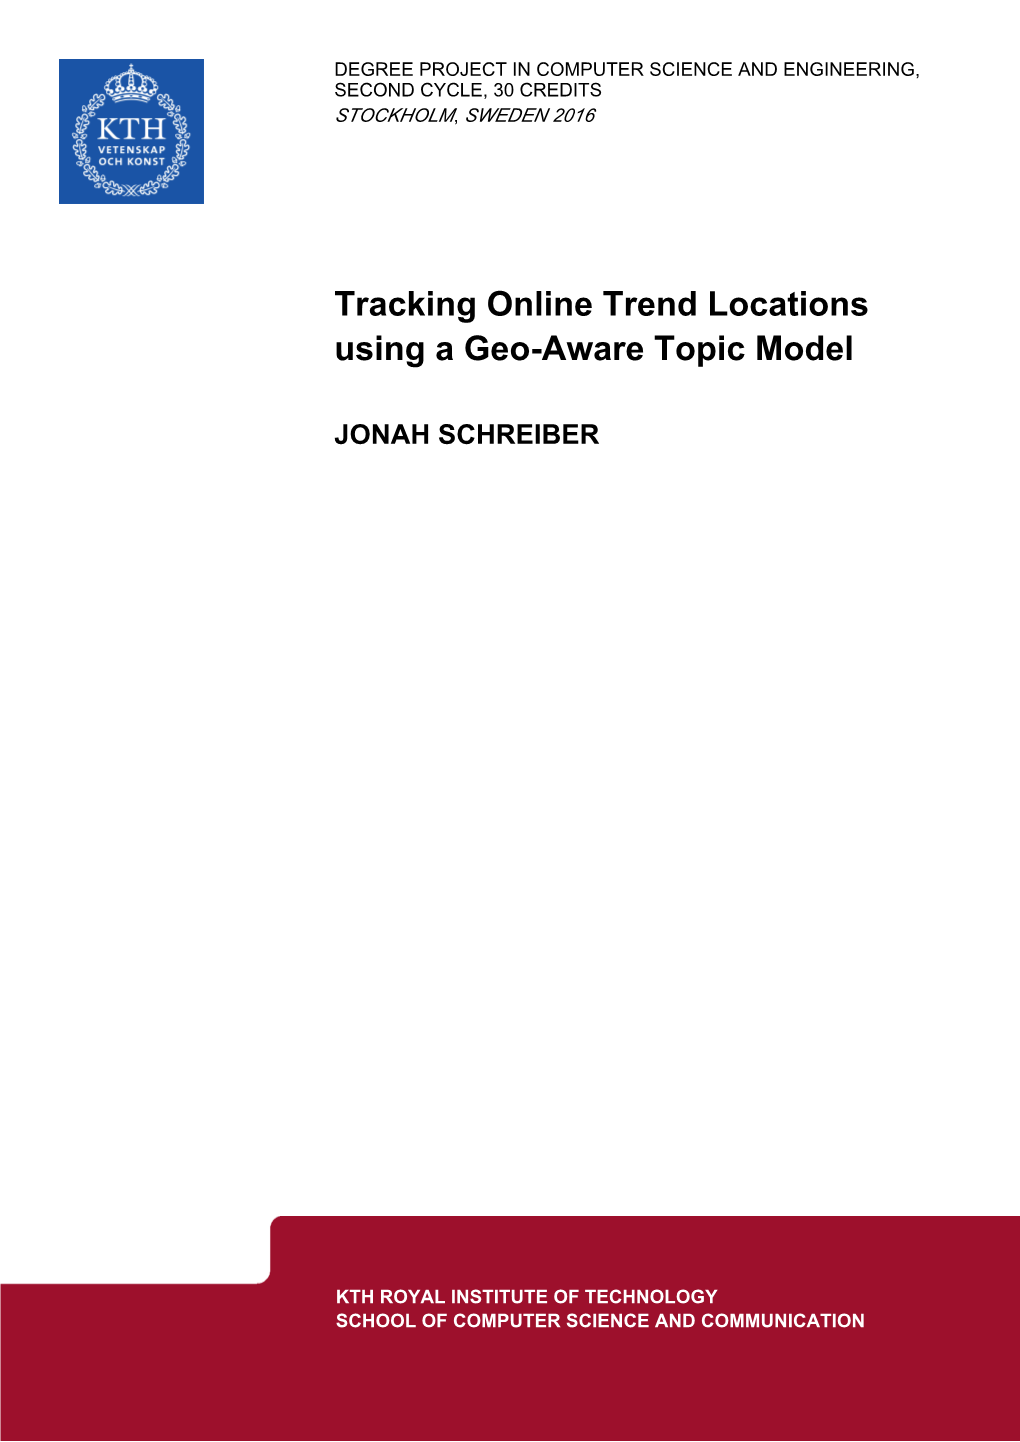 Tracking Online Trend Locations Using a Geo-Aware Topic Model